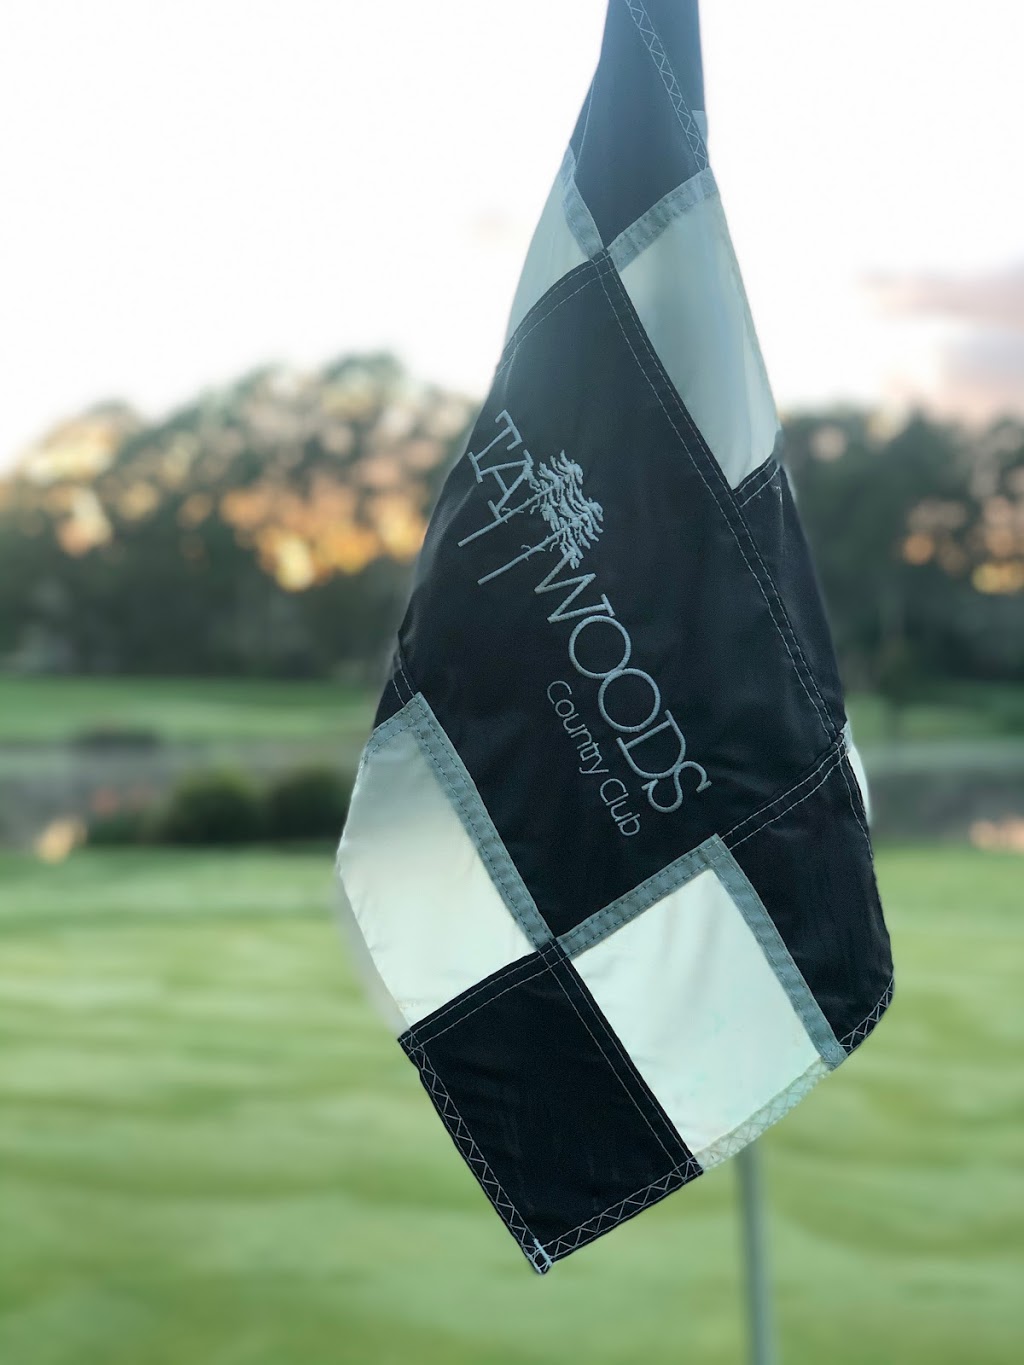 Tallwoods Golf & Country Club | lodging | 61 The Blvd, Tallwoods Village NSW 2430, Australia | 0265933228 OR +61 2 6593 3228